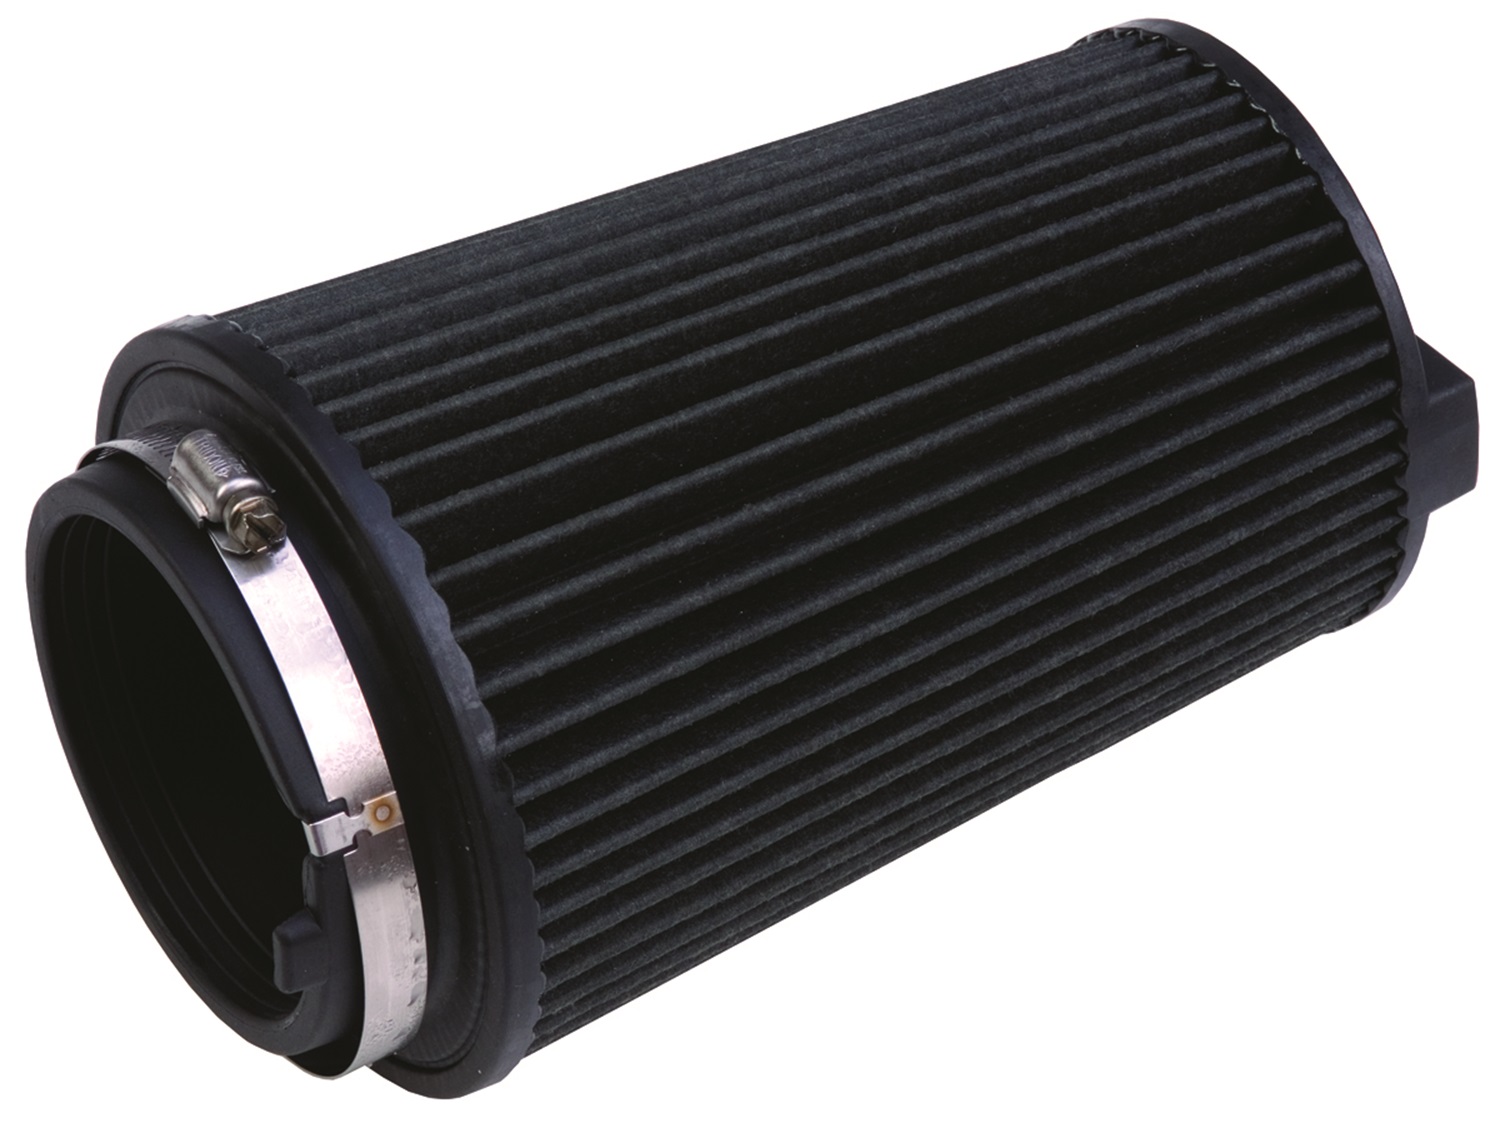 Ford Racing Ford Racing M-9601-B Air Filter Element Fits 08-09 Mustang